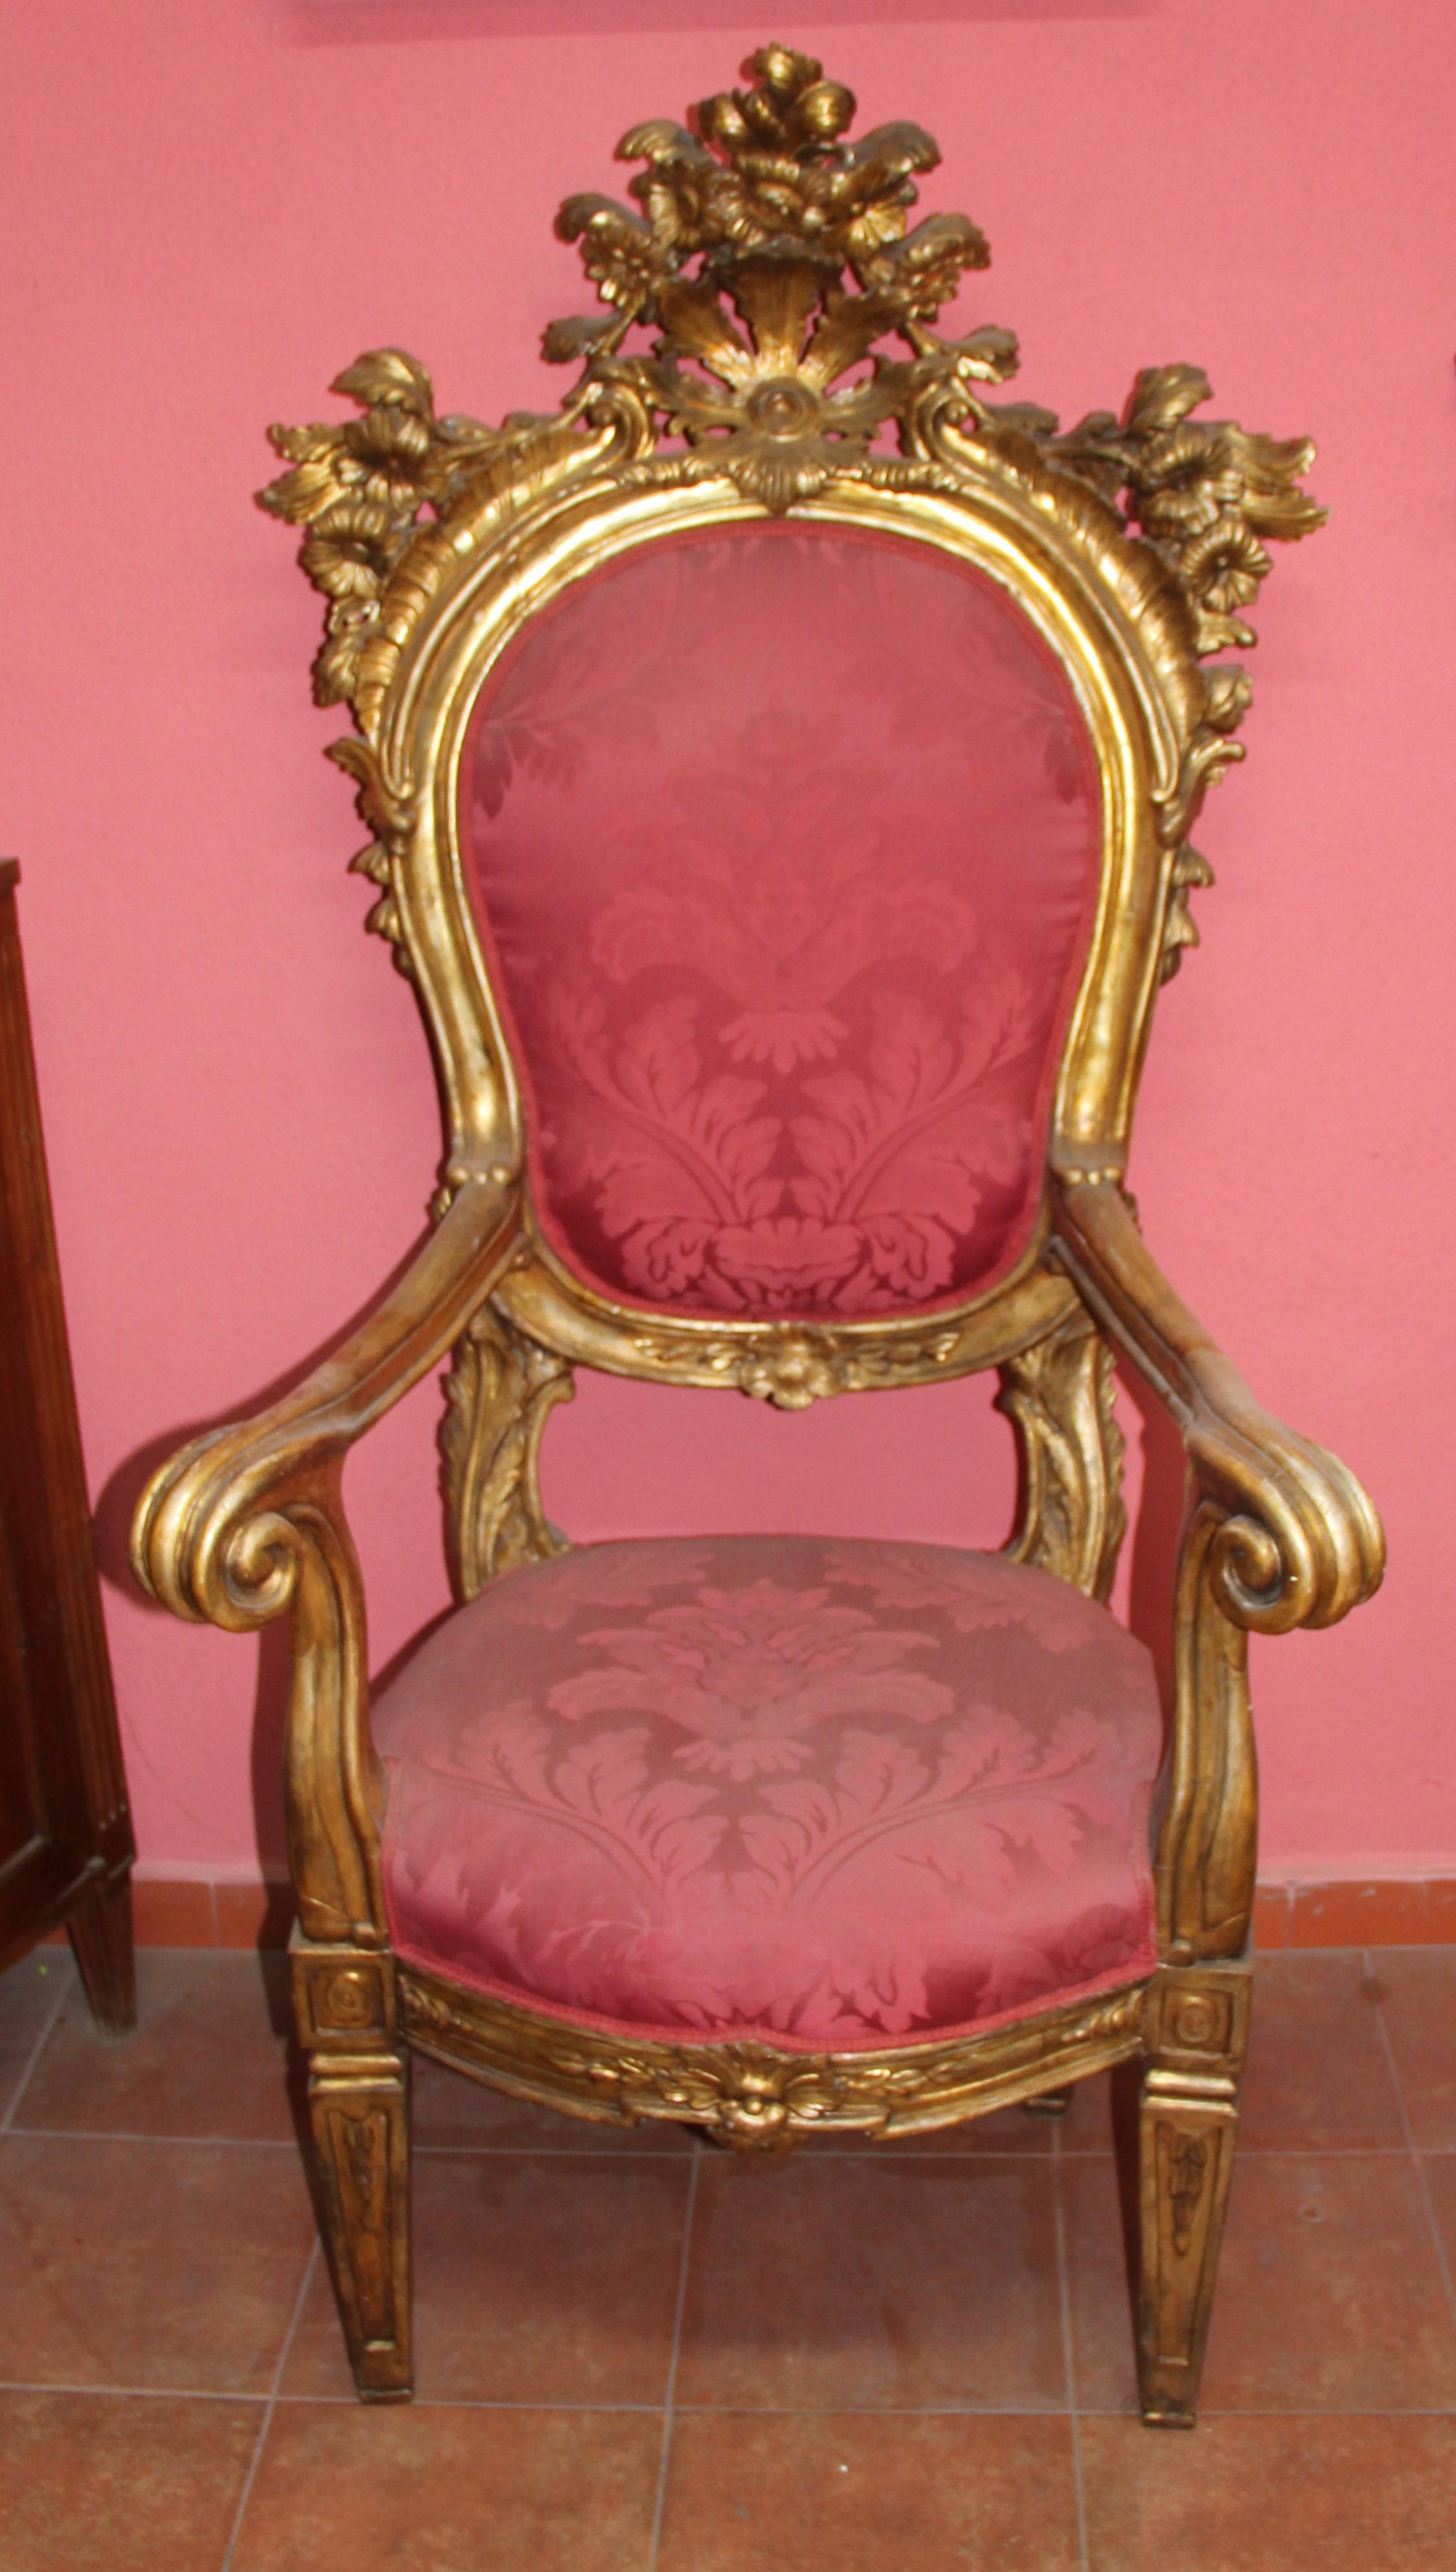 With an ornate flower-head and flowering vase cresting above an arched oval form padded back with open scroll arms, the bowed seat raised on square tapered legs.
The Throne is executed in the Rococo style, an ornate asymmetrical style using